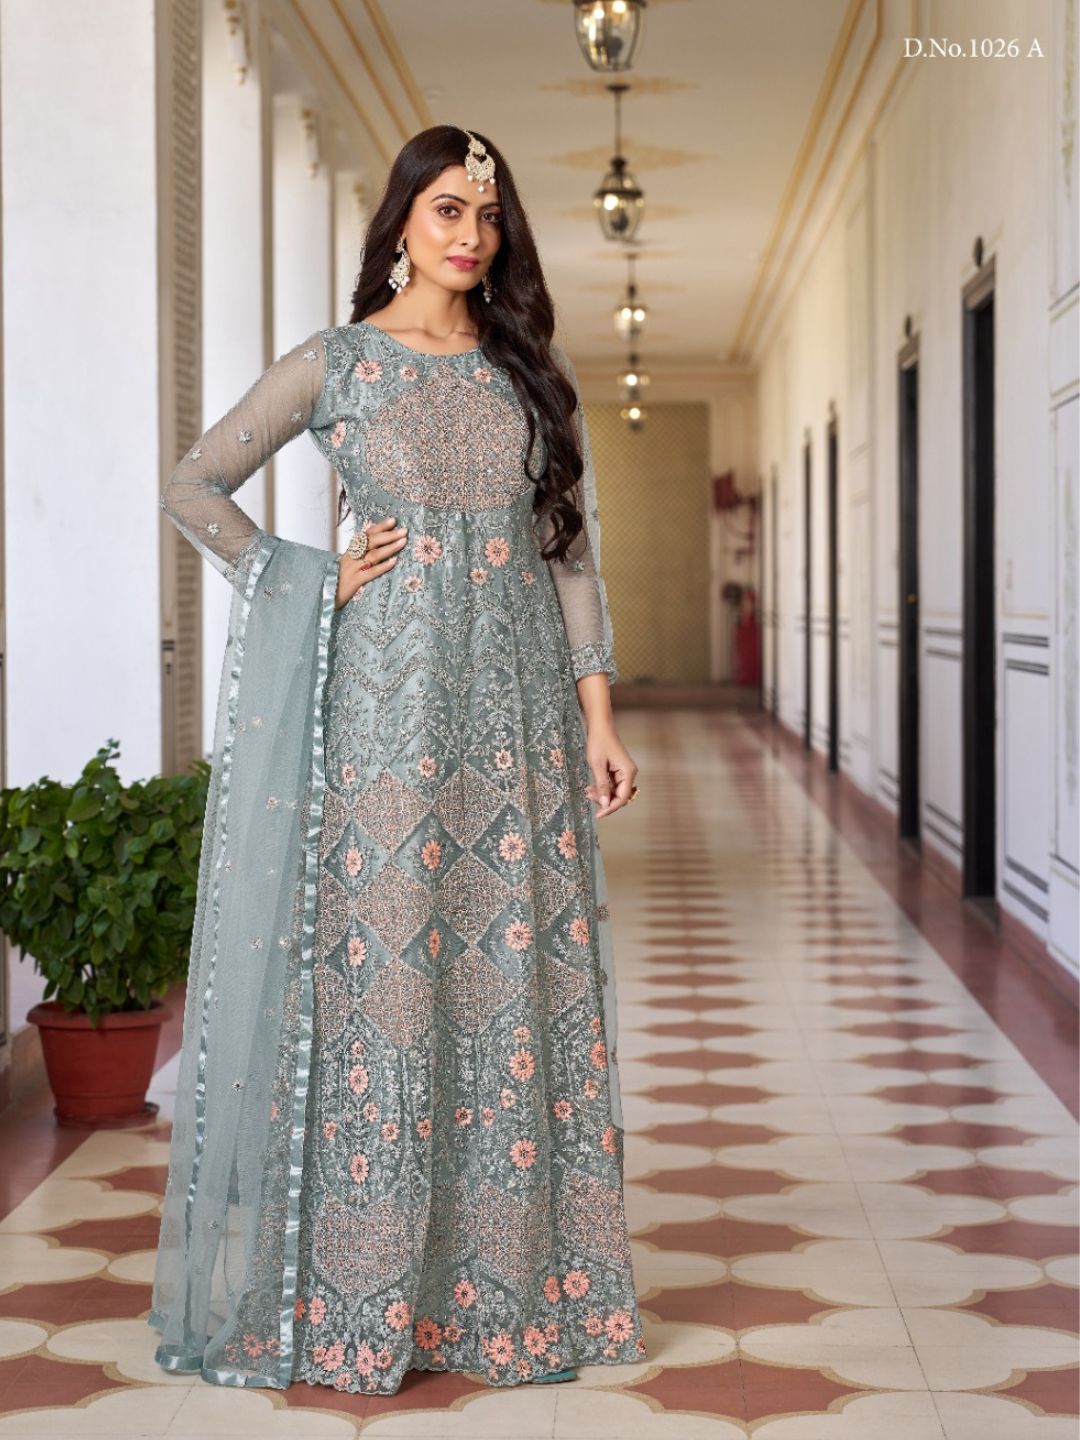 Net Embroidered Bollywood Salwar Kameez in Grey with Stone work-81974